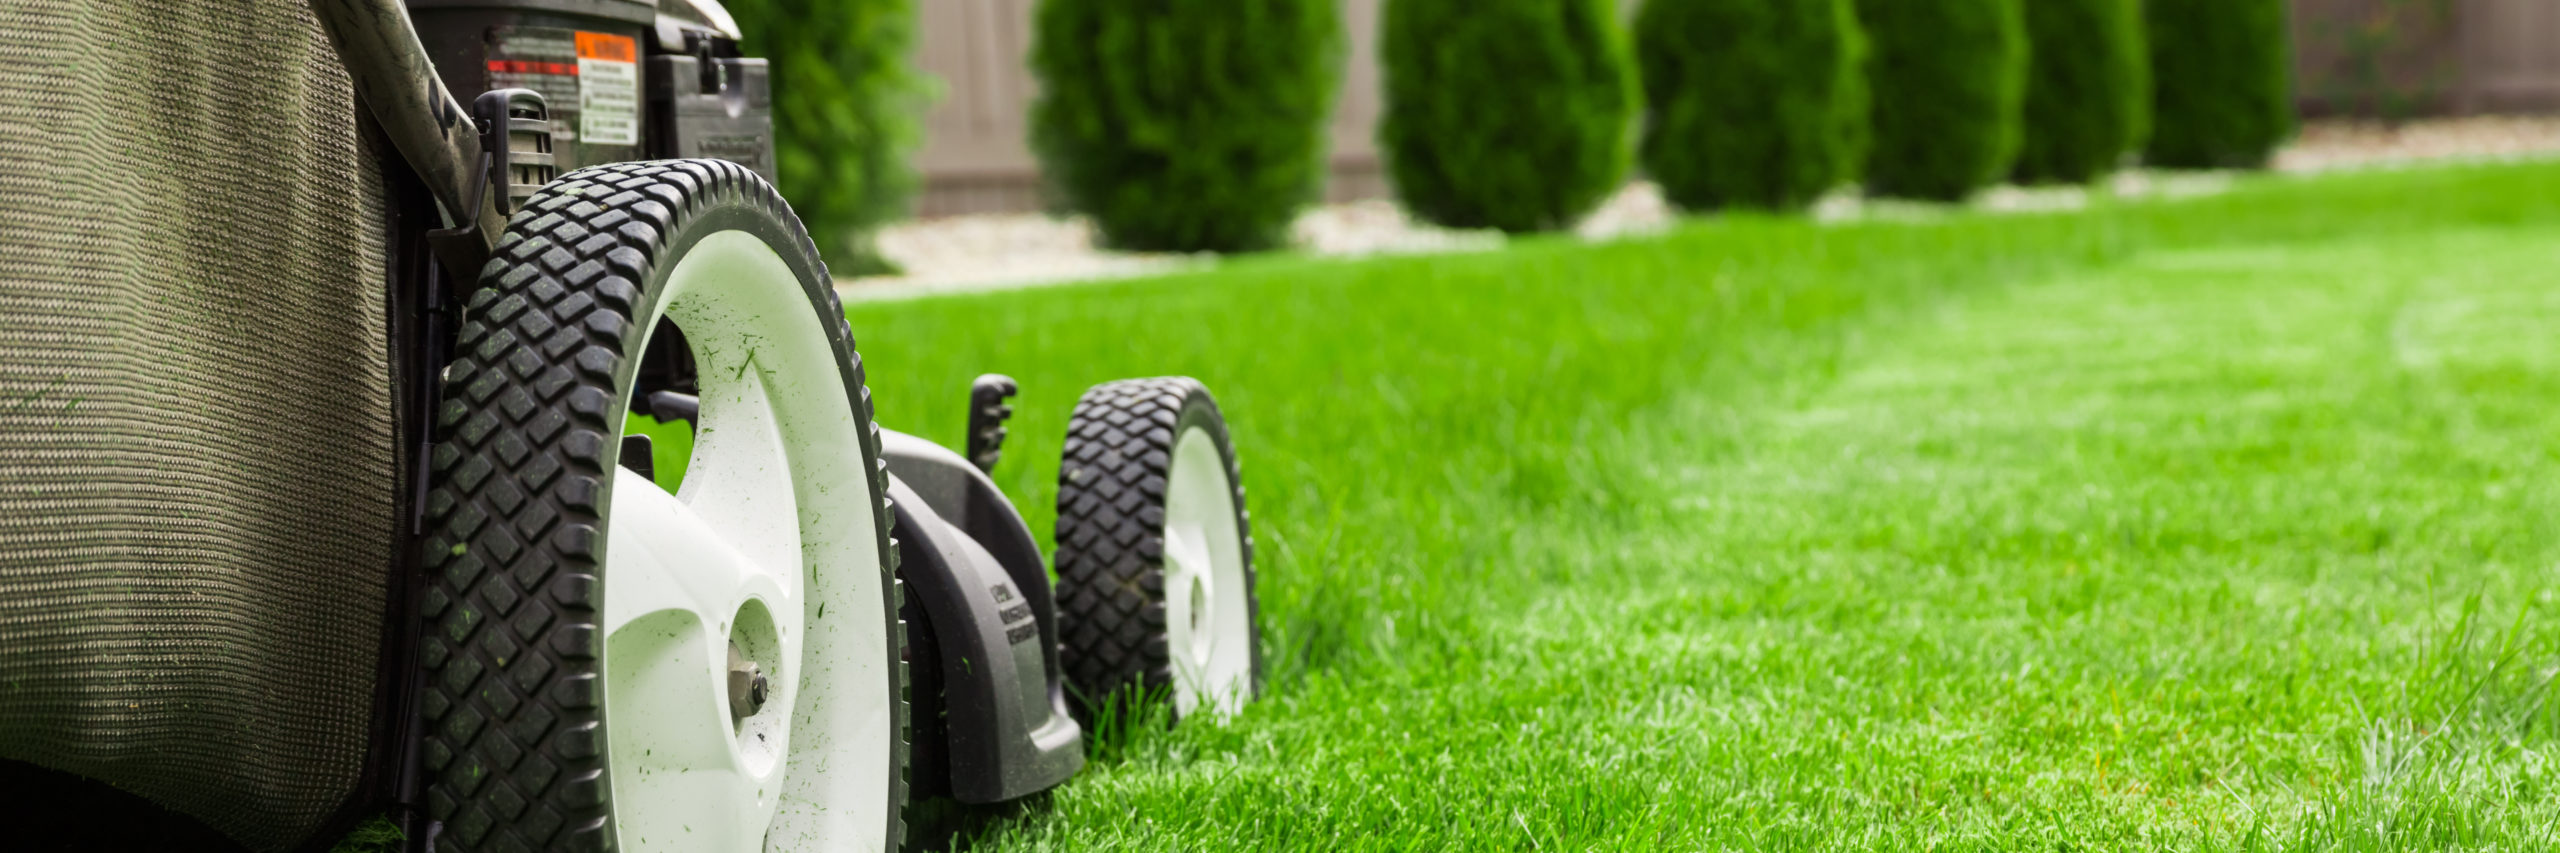 Step Up Your Lawn Care Game